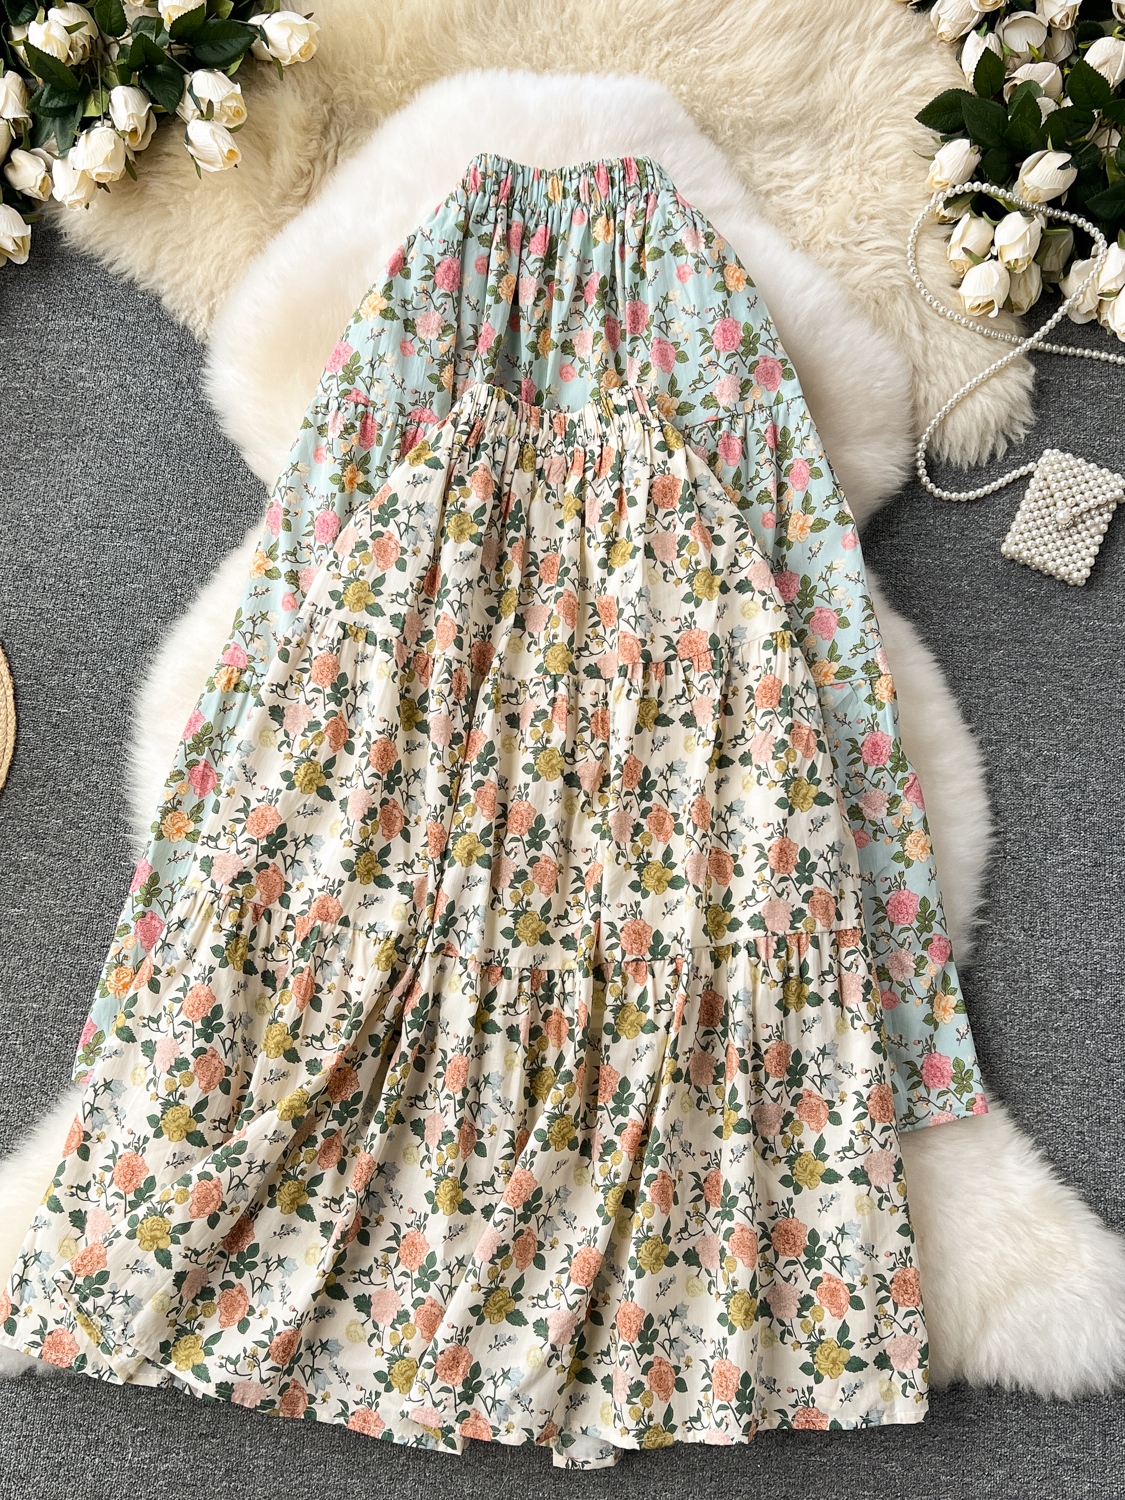 Countryside style rose print half skirt for women, sweet and age reducing mid length elastic waist, slimming temperament A-line fluffy skirt